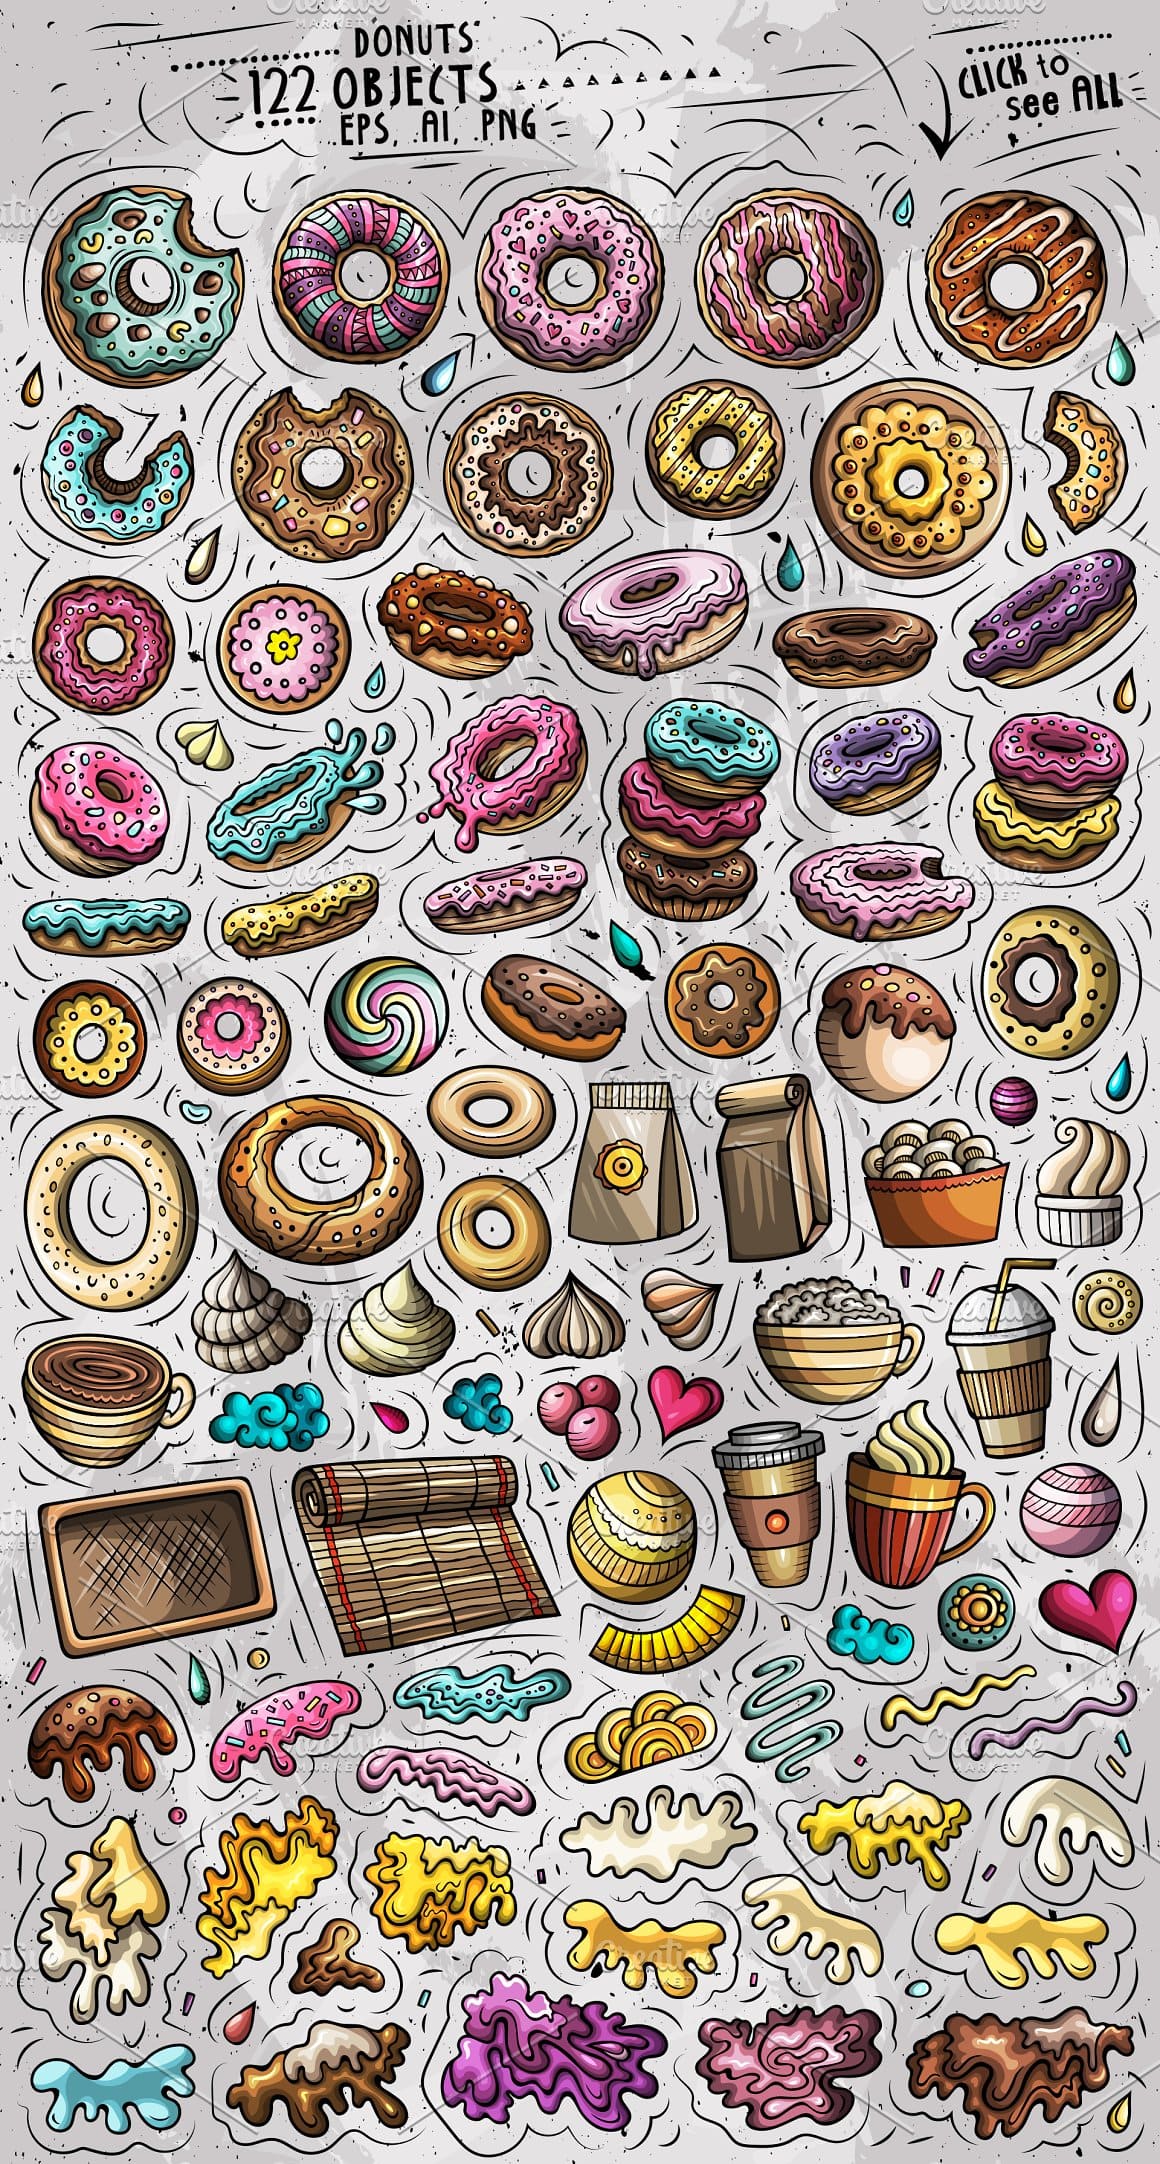 Donuts Cartoon Vector Objects Set Preview 2.